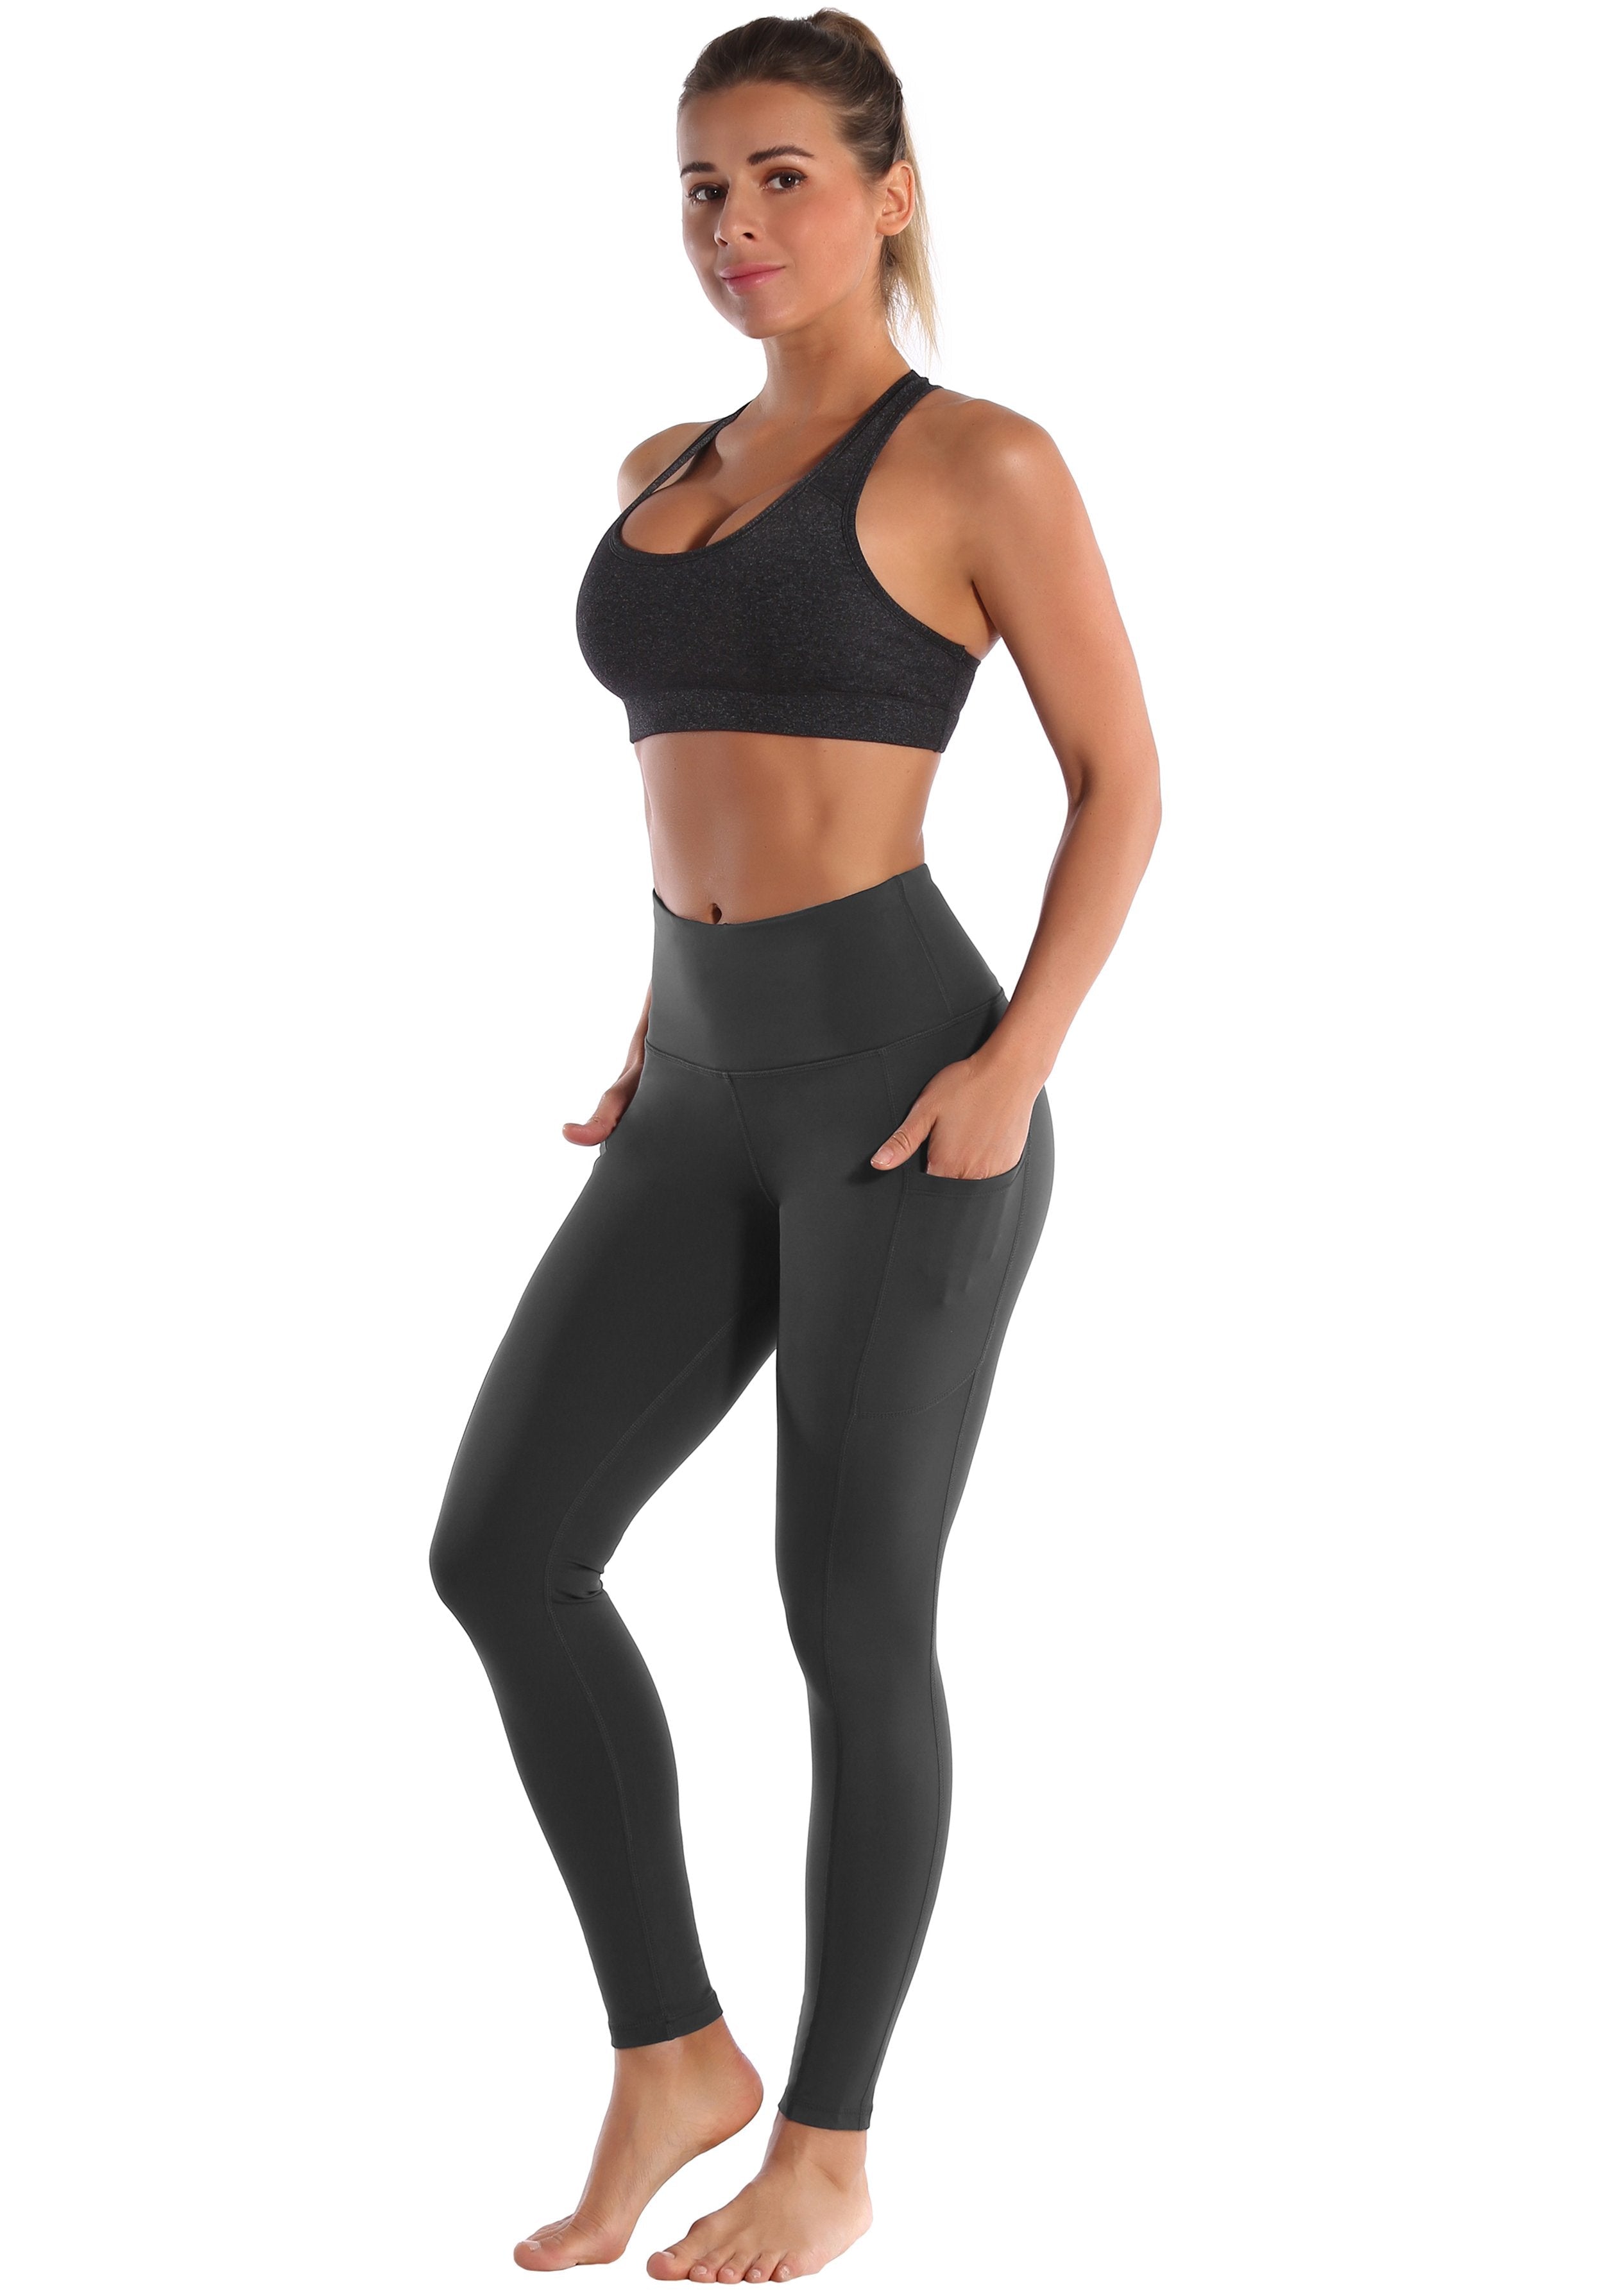 Hip Line Side Pockets Tall Size Pants shadowcharcoal Sexy Hip Line Side Pockets 75%Nylon/25%Spandex Fabric doesn't attract lint easily 4-way stretch No see-through Moisture-wicking Tummy control Inner pocket Two lengths